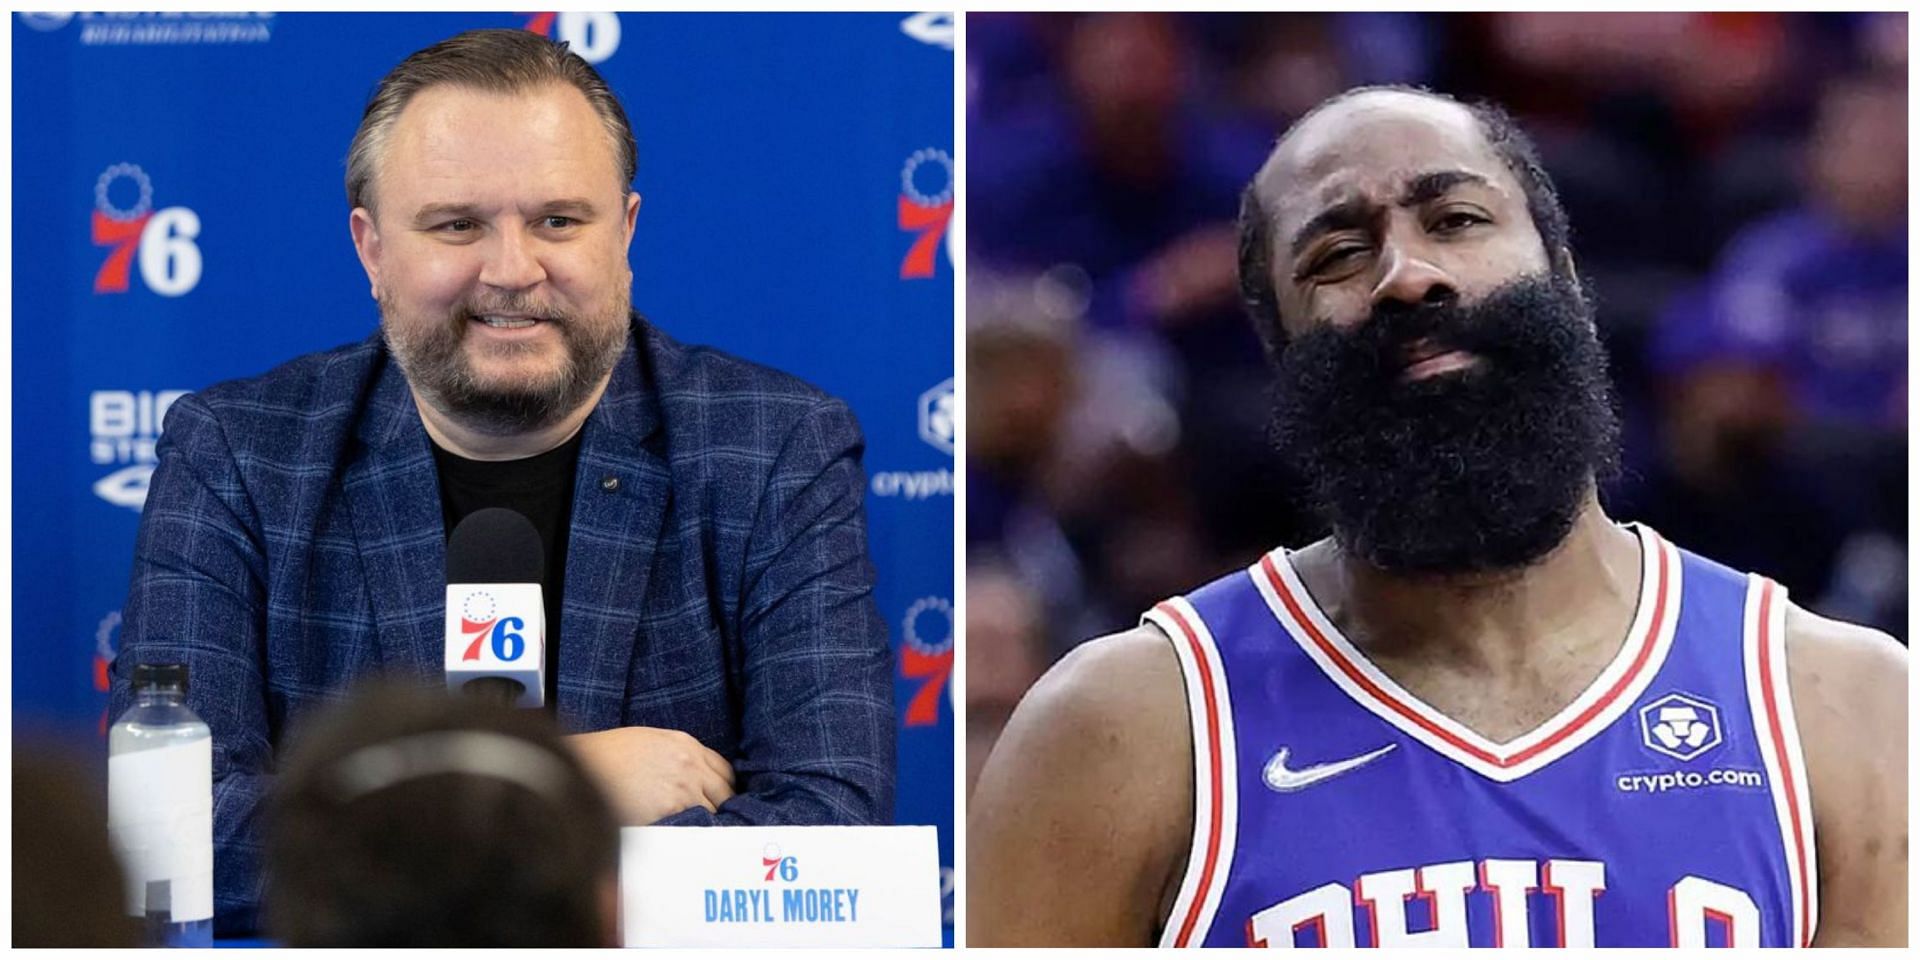 Fans react to James Harden comparing Daryl Morey relationship to marriage